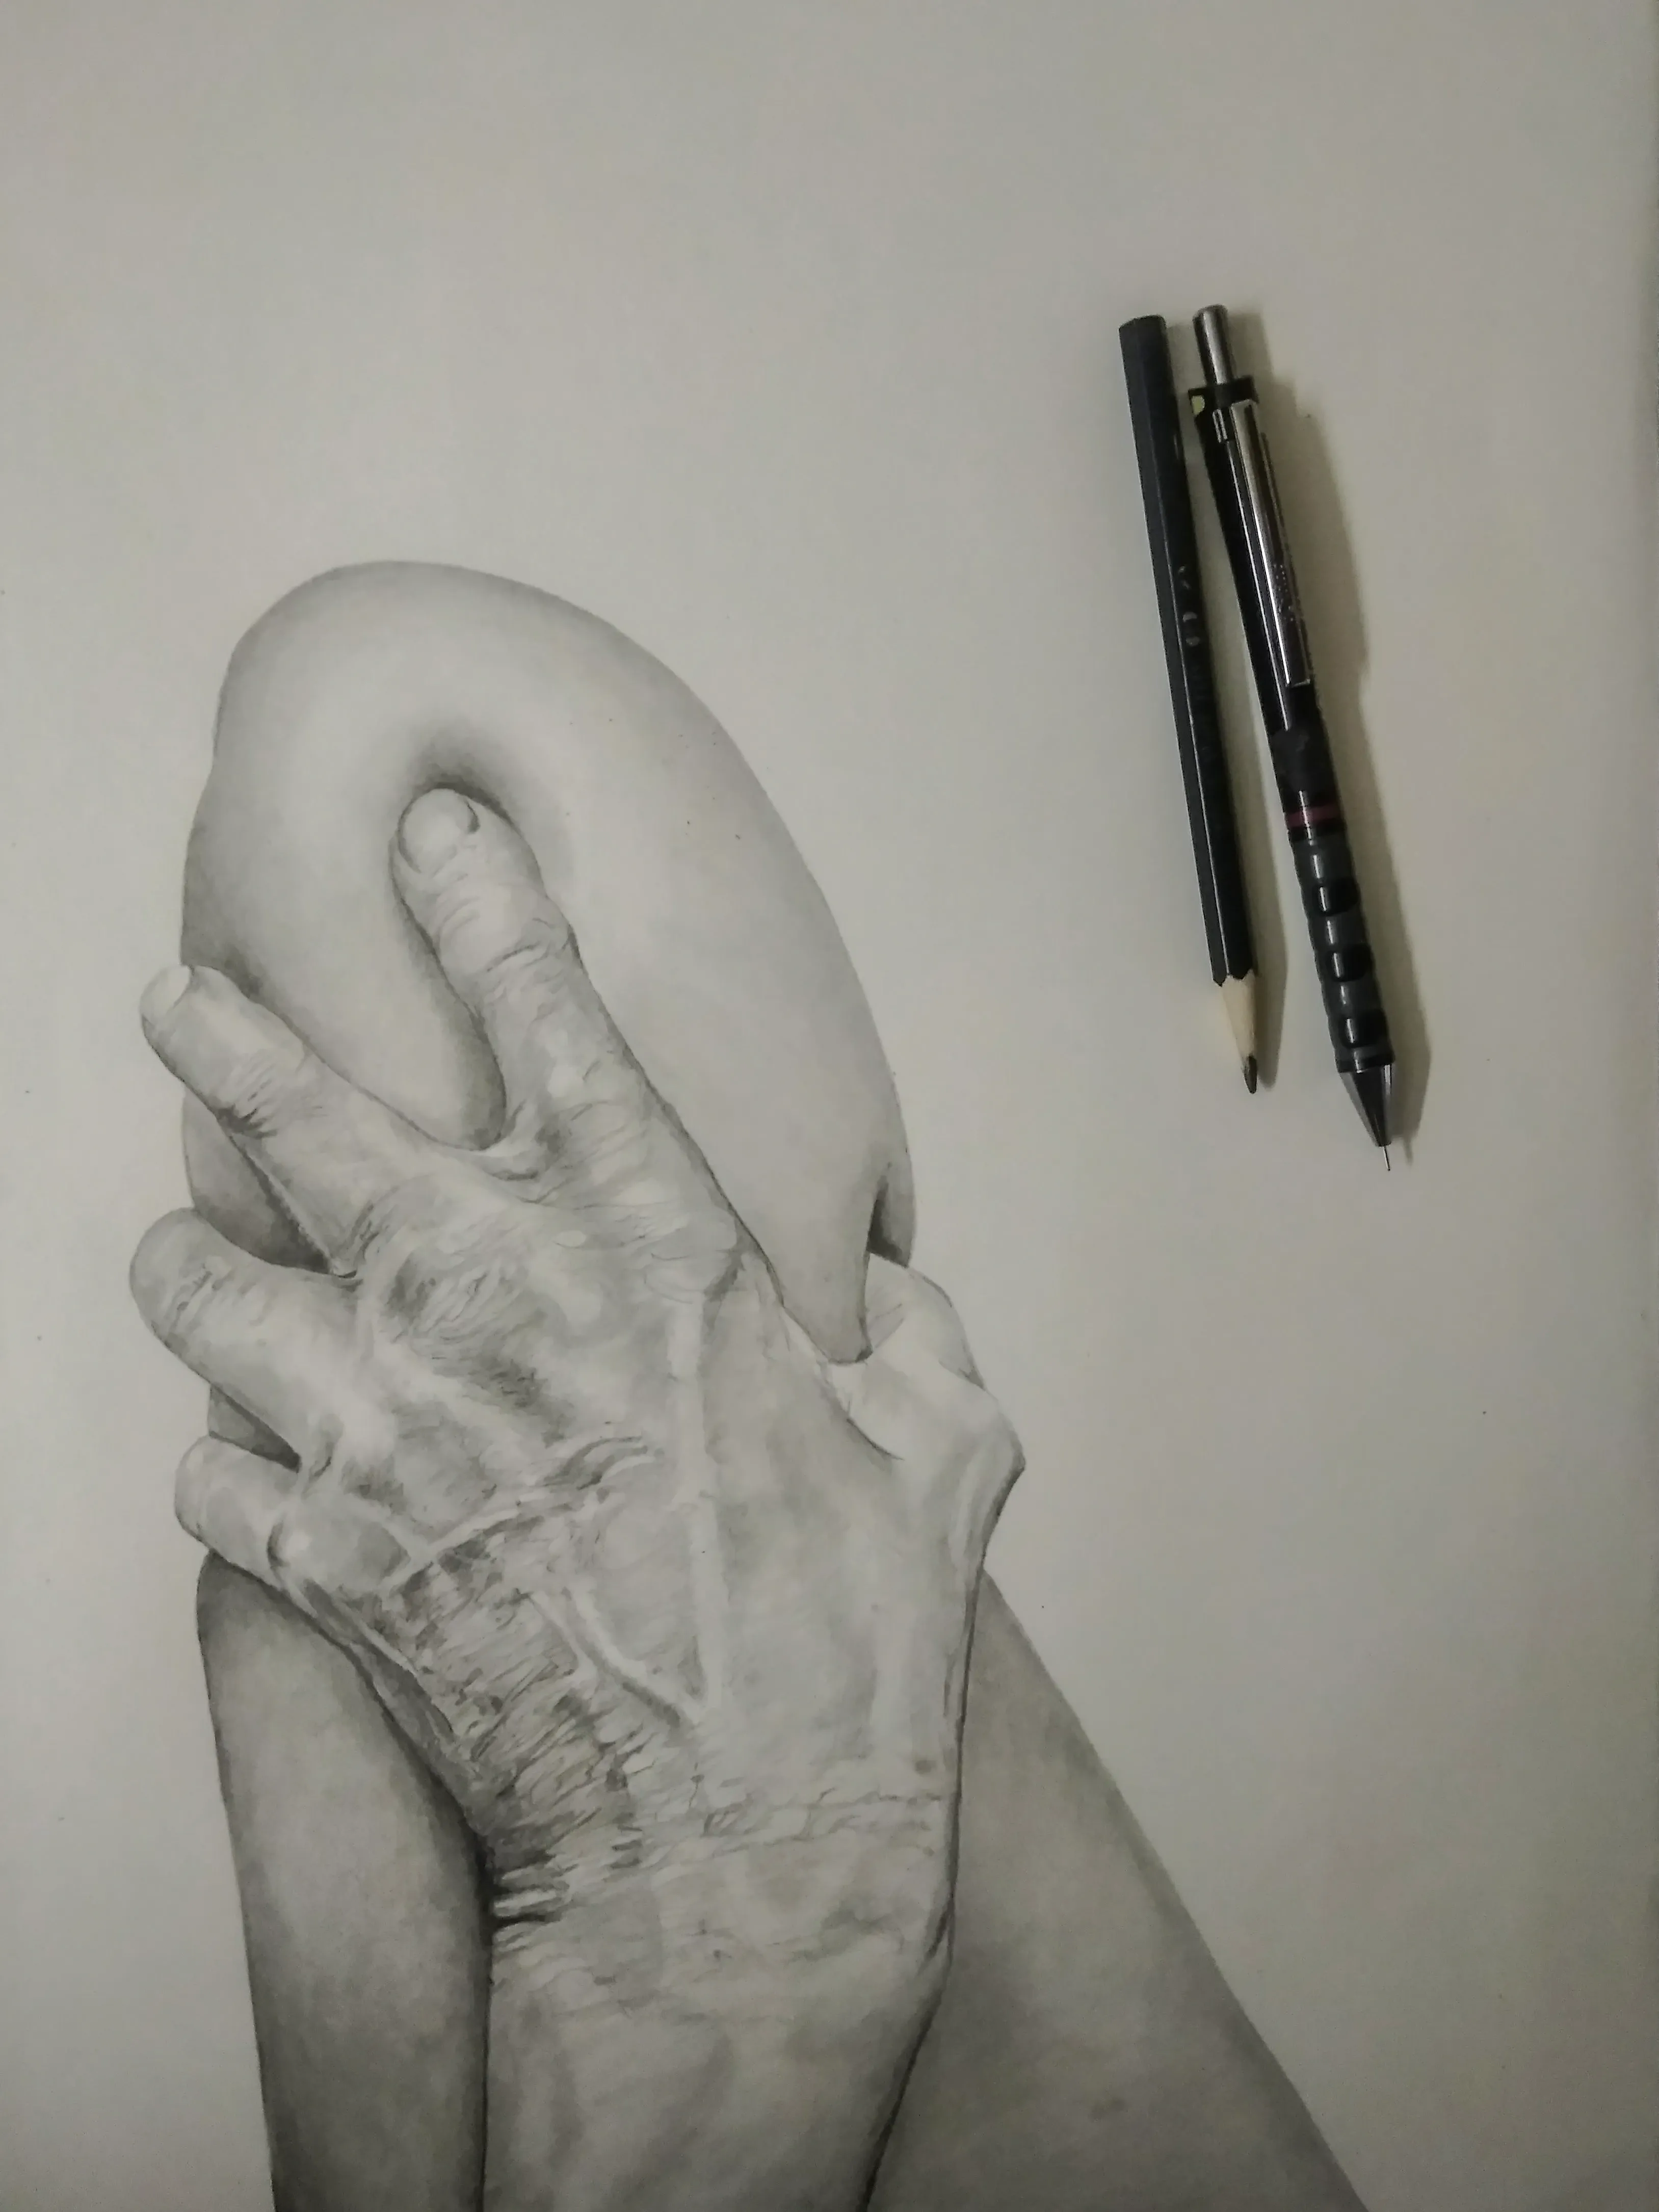 Drawing of a hand grabbing a thigh